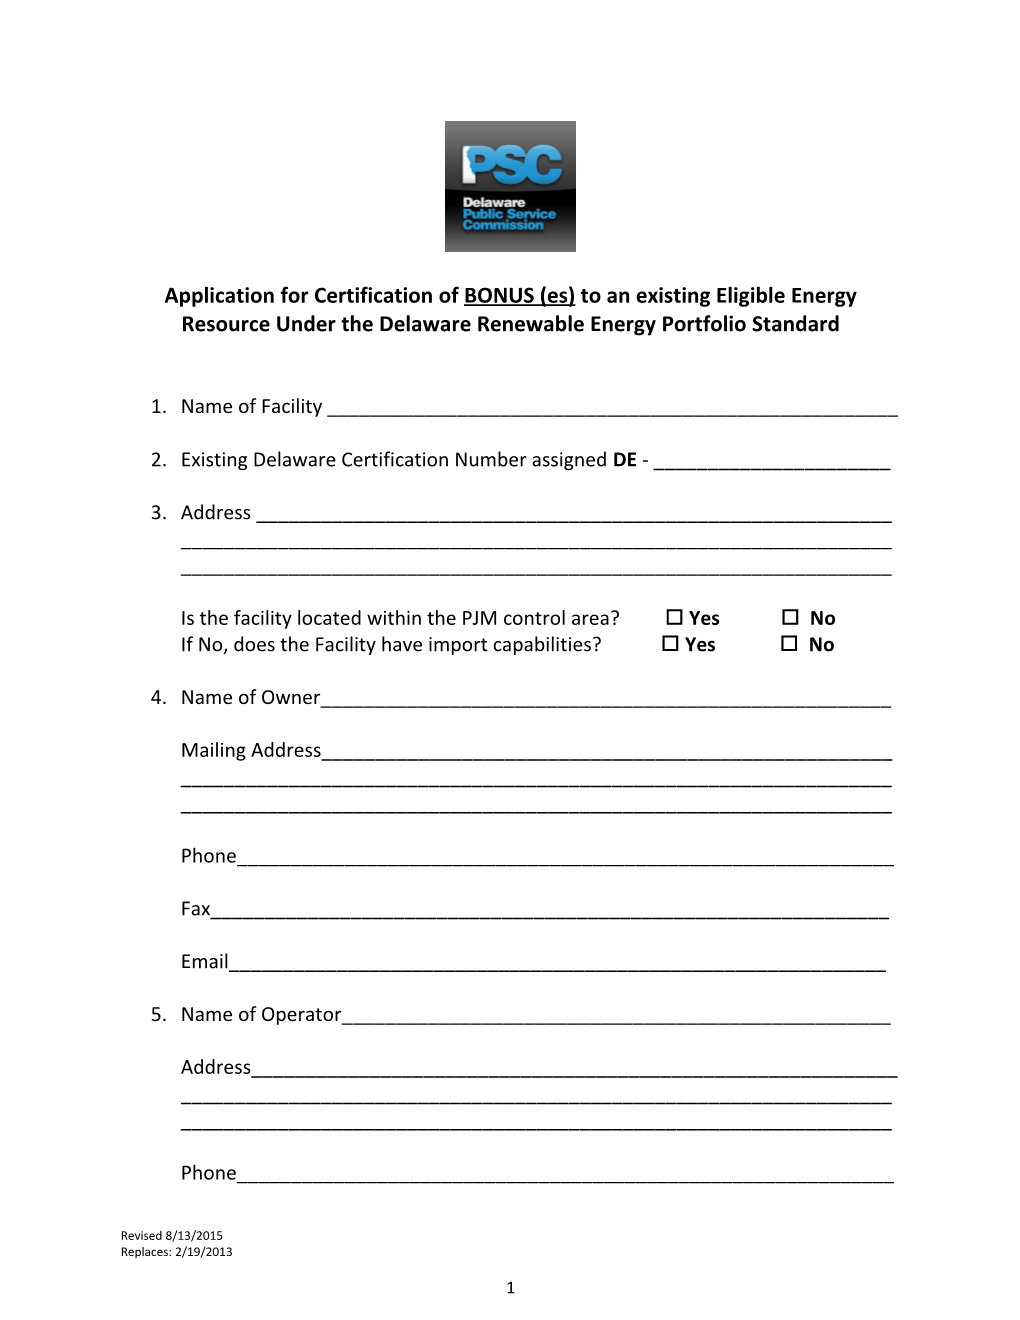 Application for Certification of BONUS (Es) to an Existing Eligible Energy Resource Under